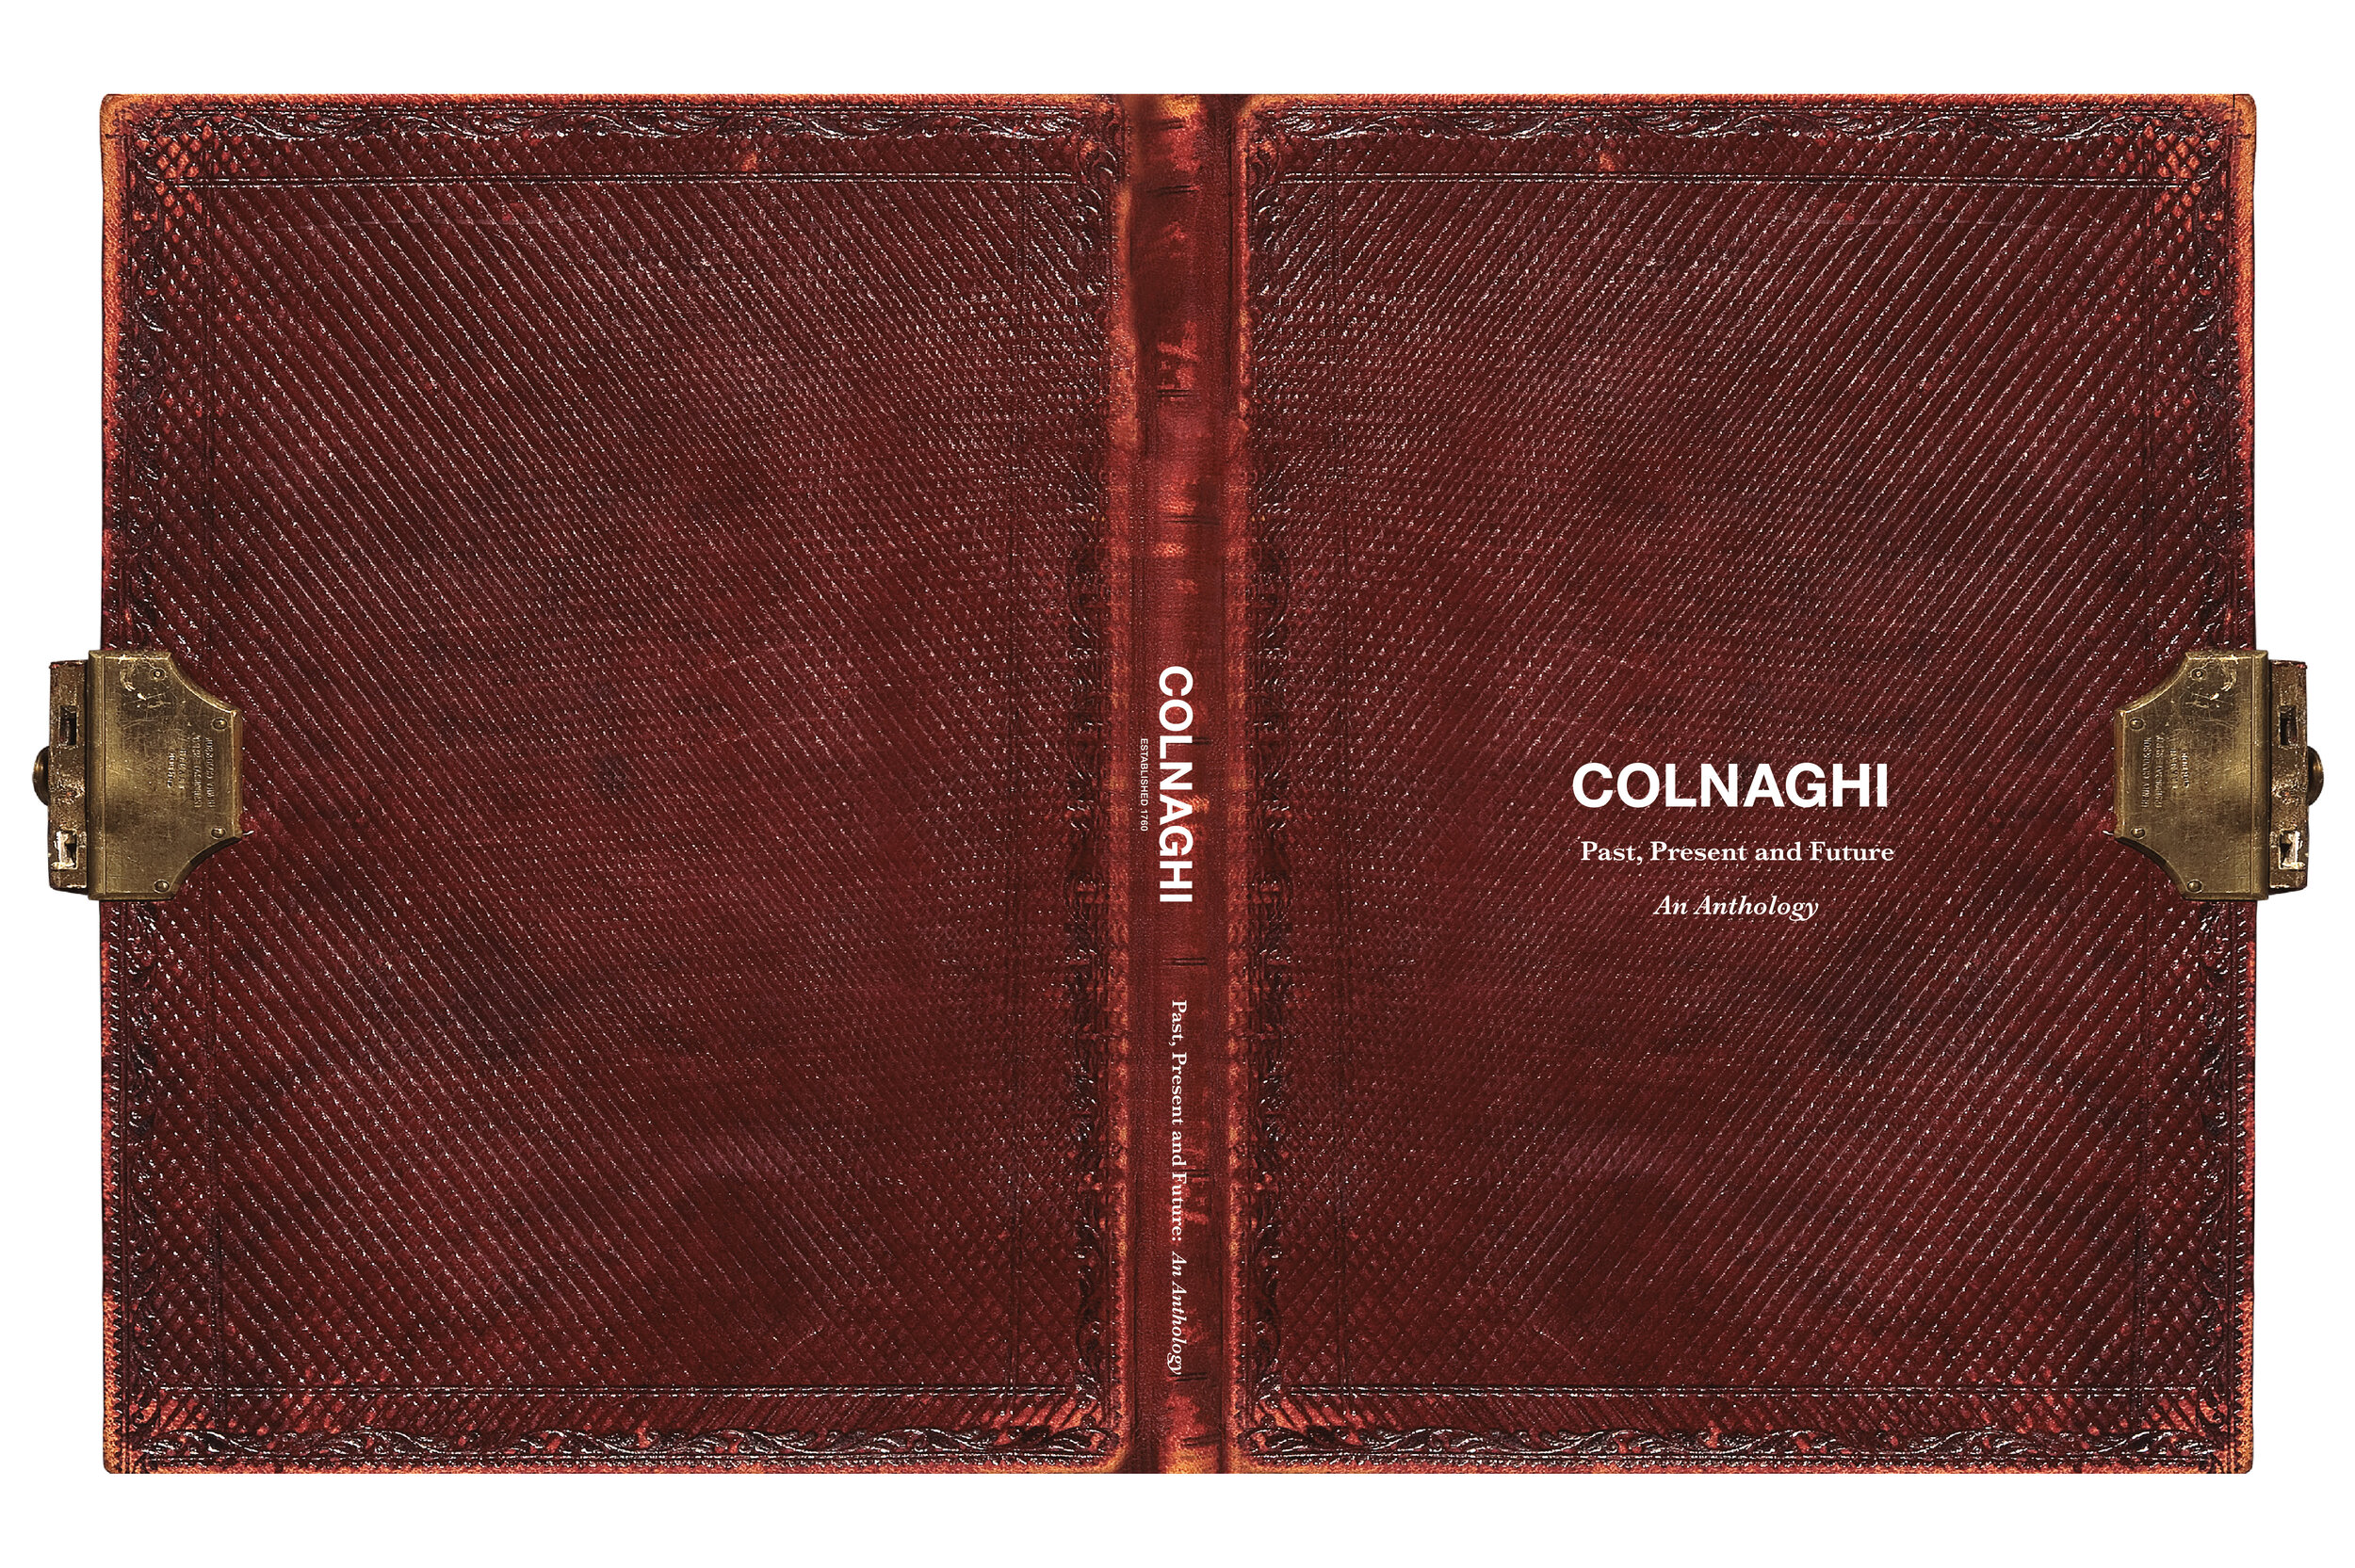 COLNAGHI PAST, PRESENT AND FUTURE. AN ANTHOLOGY